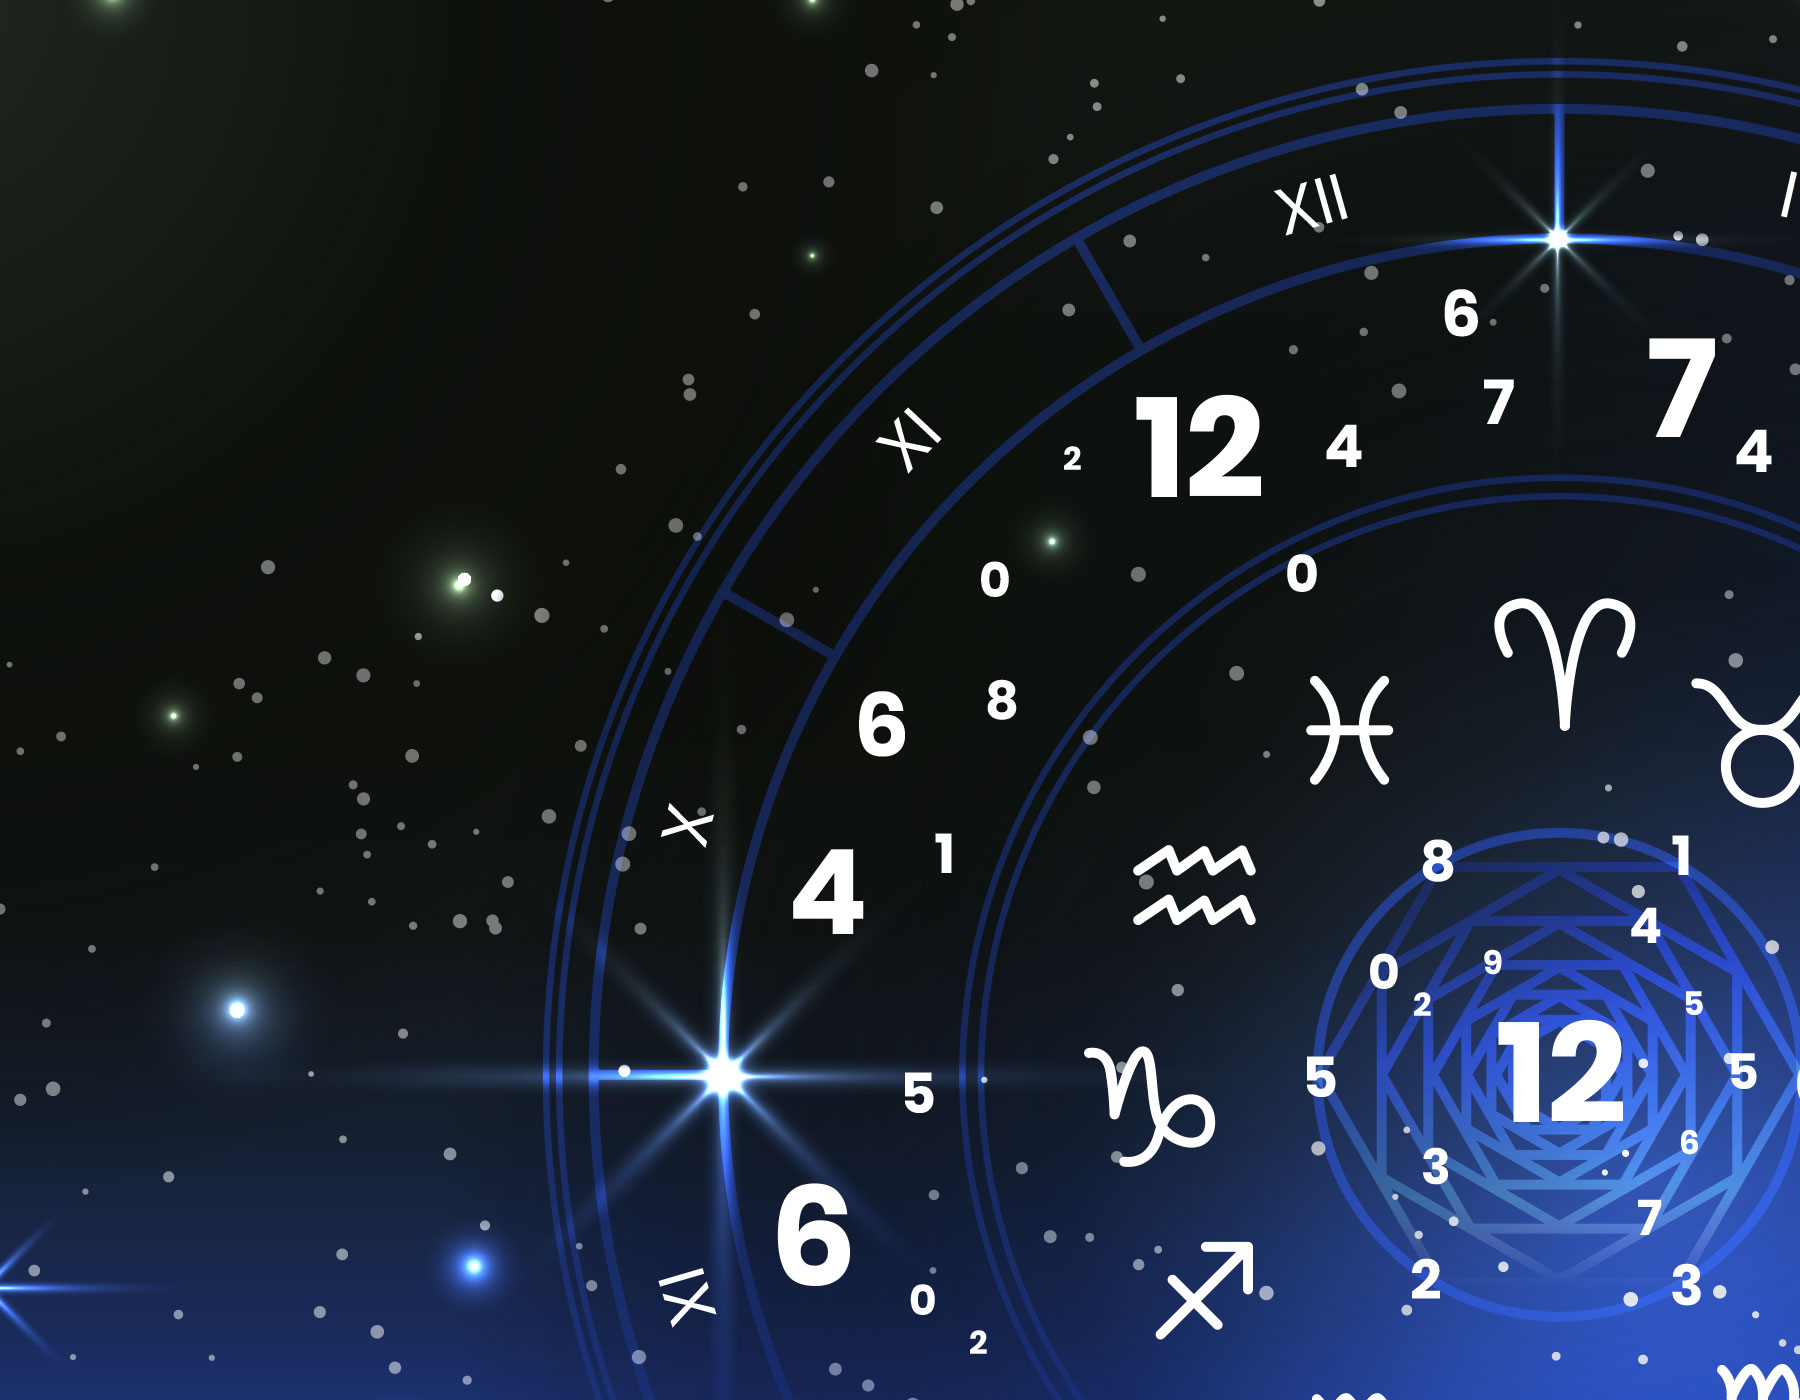 10 Powerful Examples of Numerology's Impact on Life